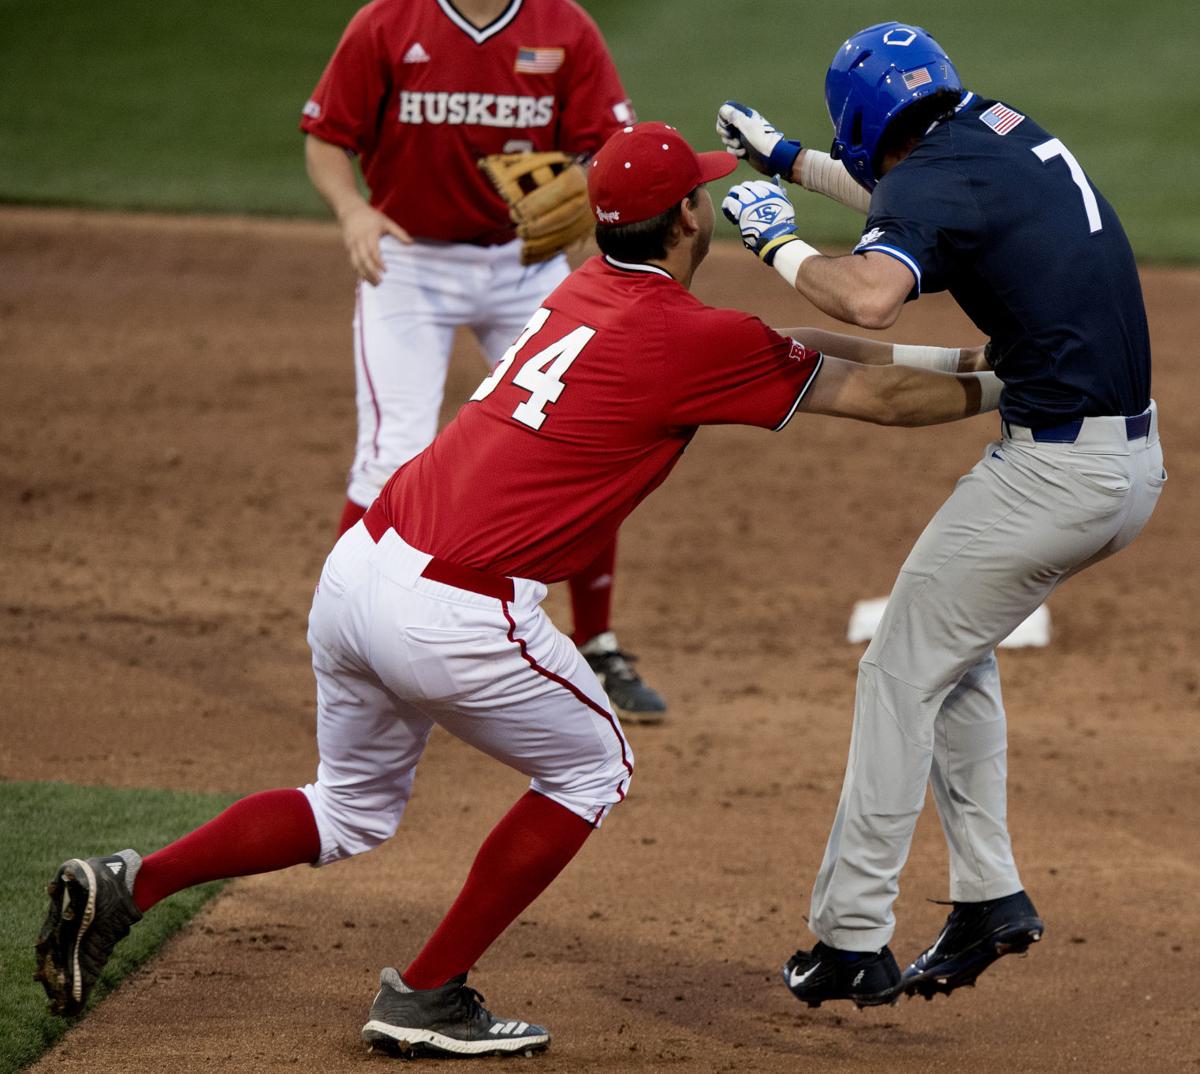 Husker baseball team humbled as Creighton breaks out early in 10-2 rout | Baseball | journalstar.com